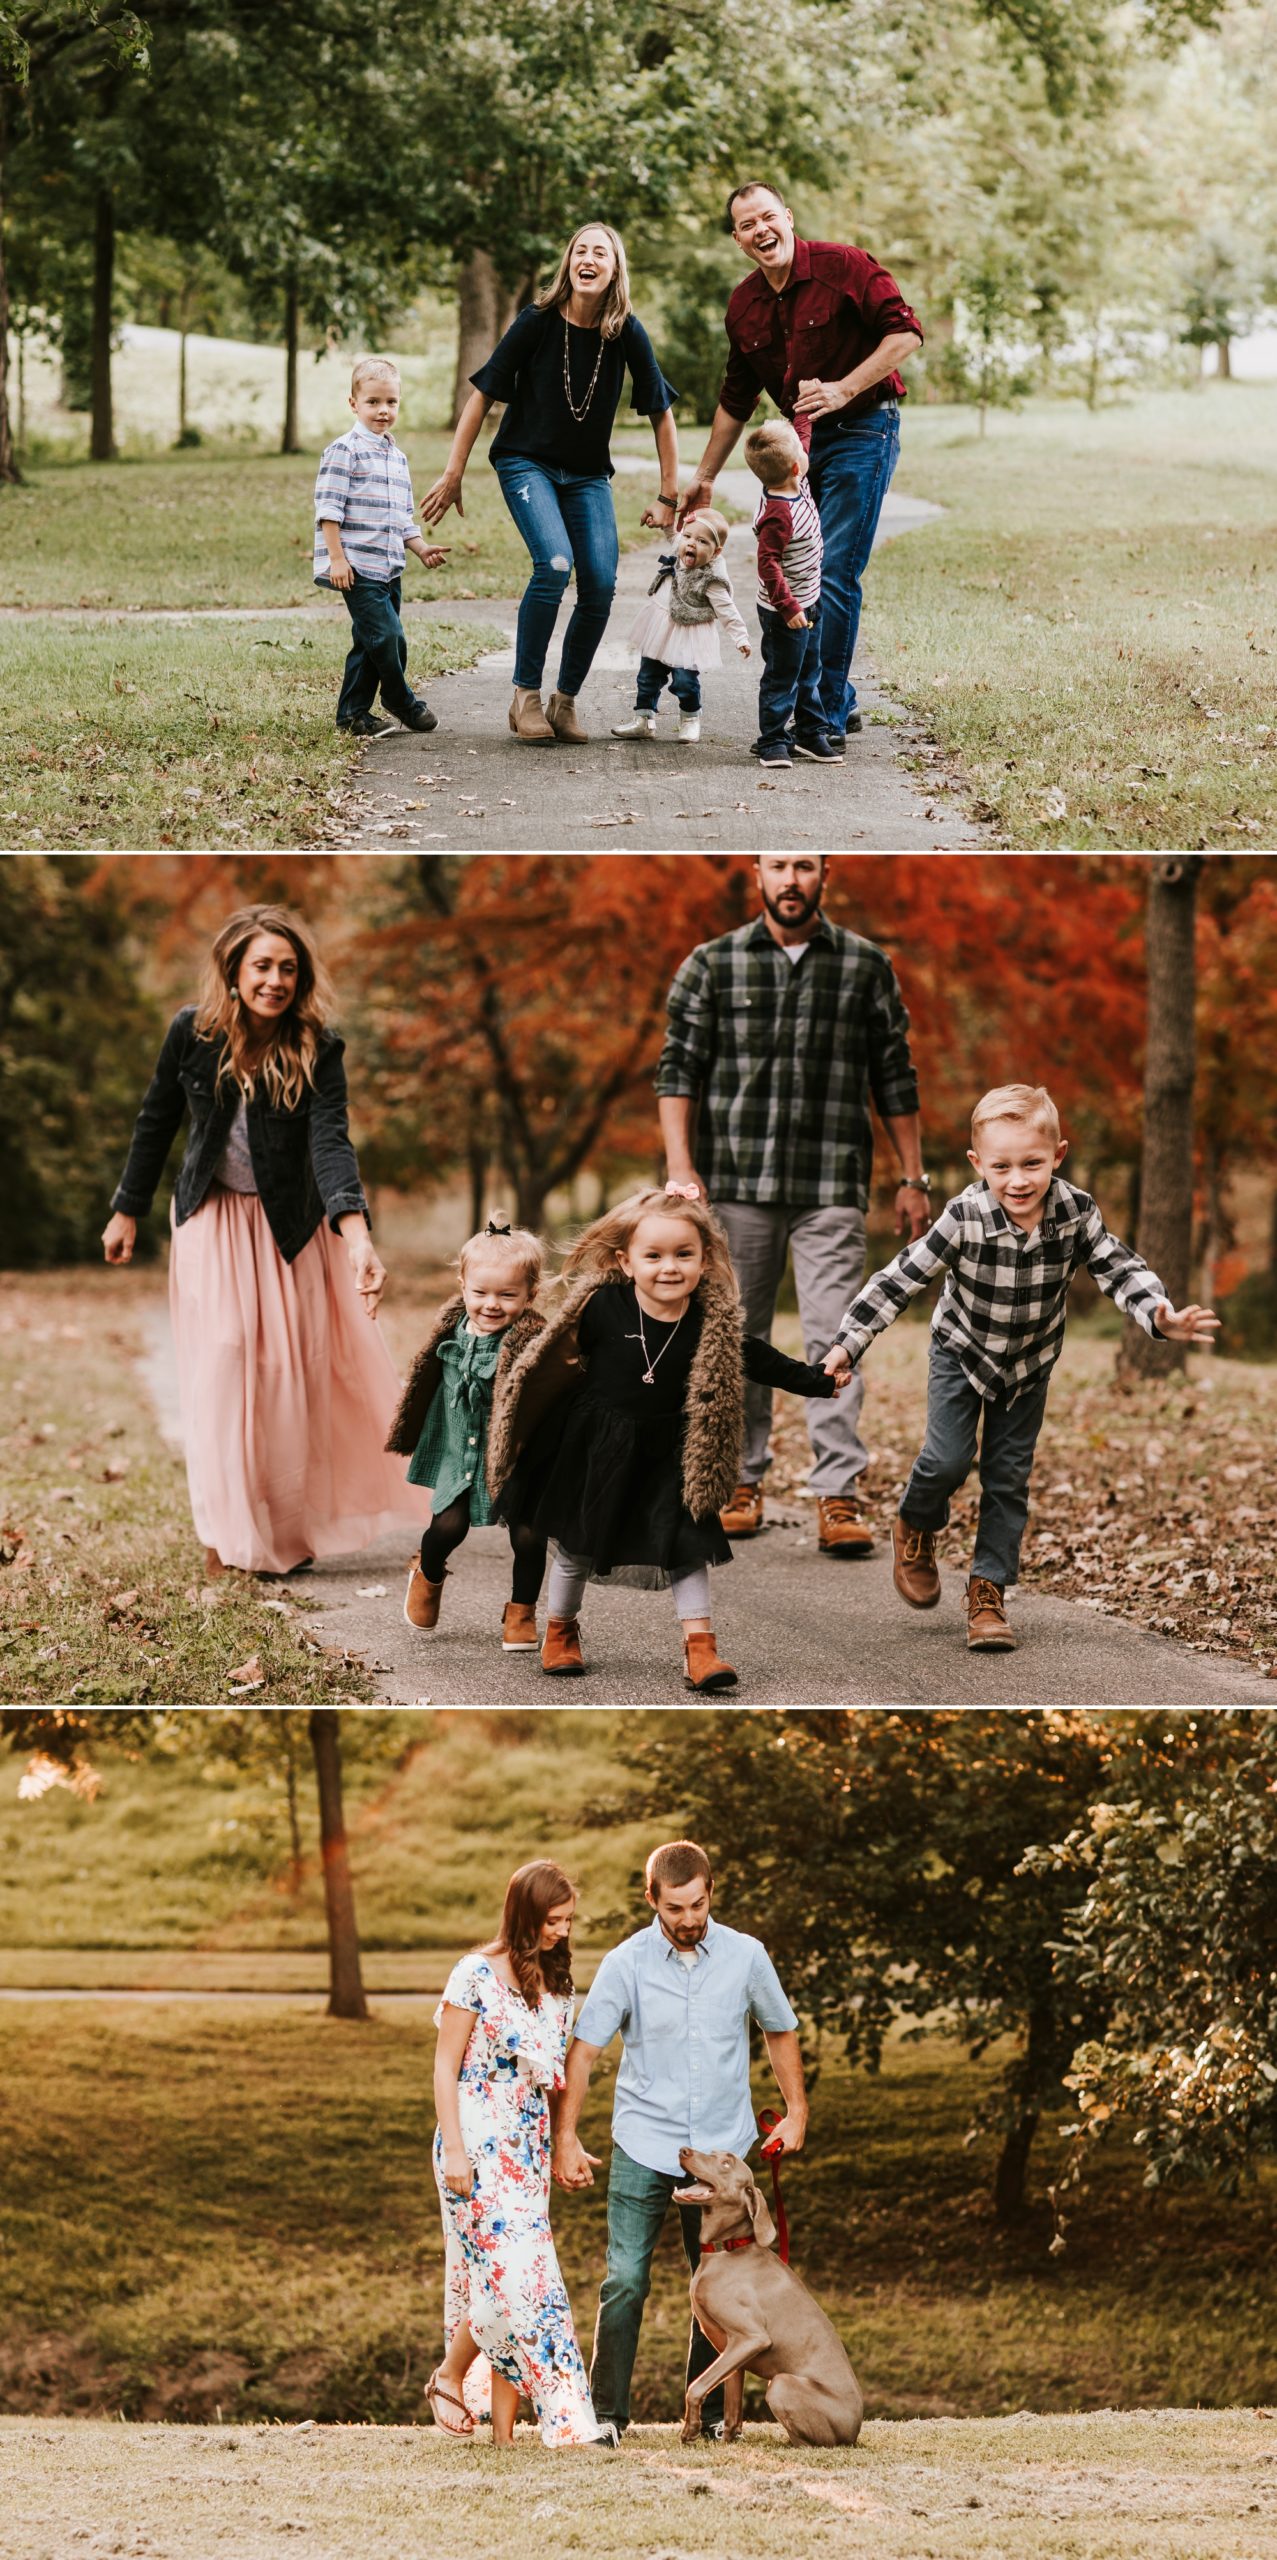 Parents making silly faces at kids and dog to make them smile. Family Photographer 63090